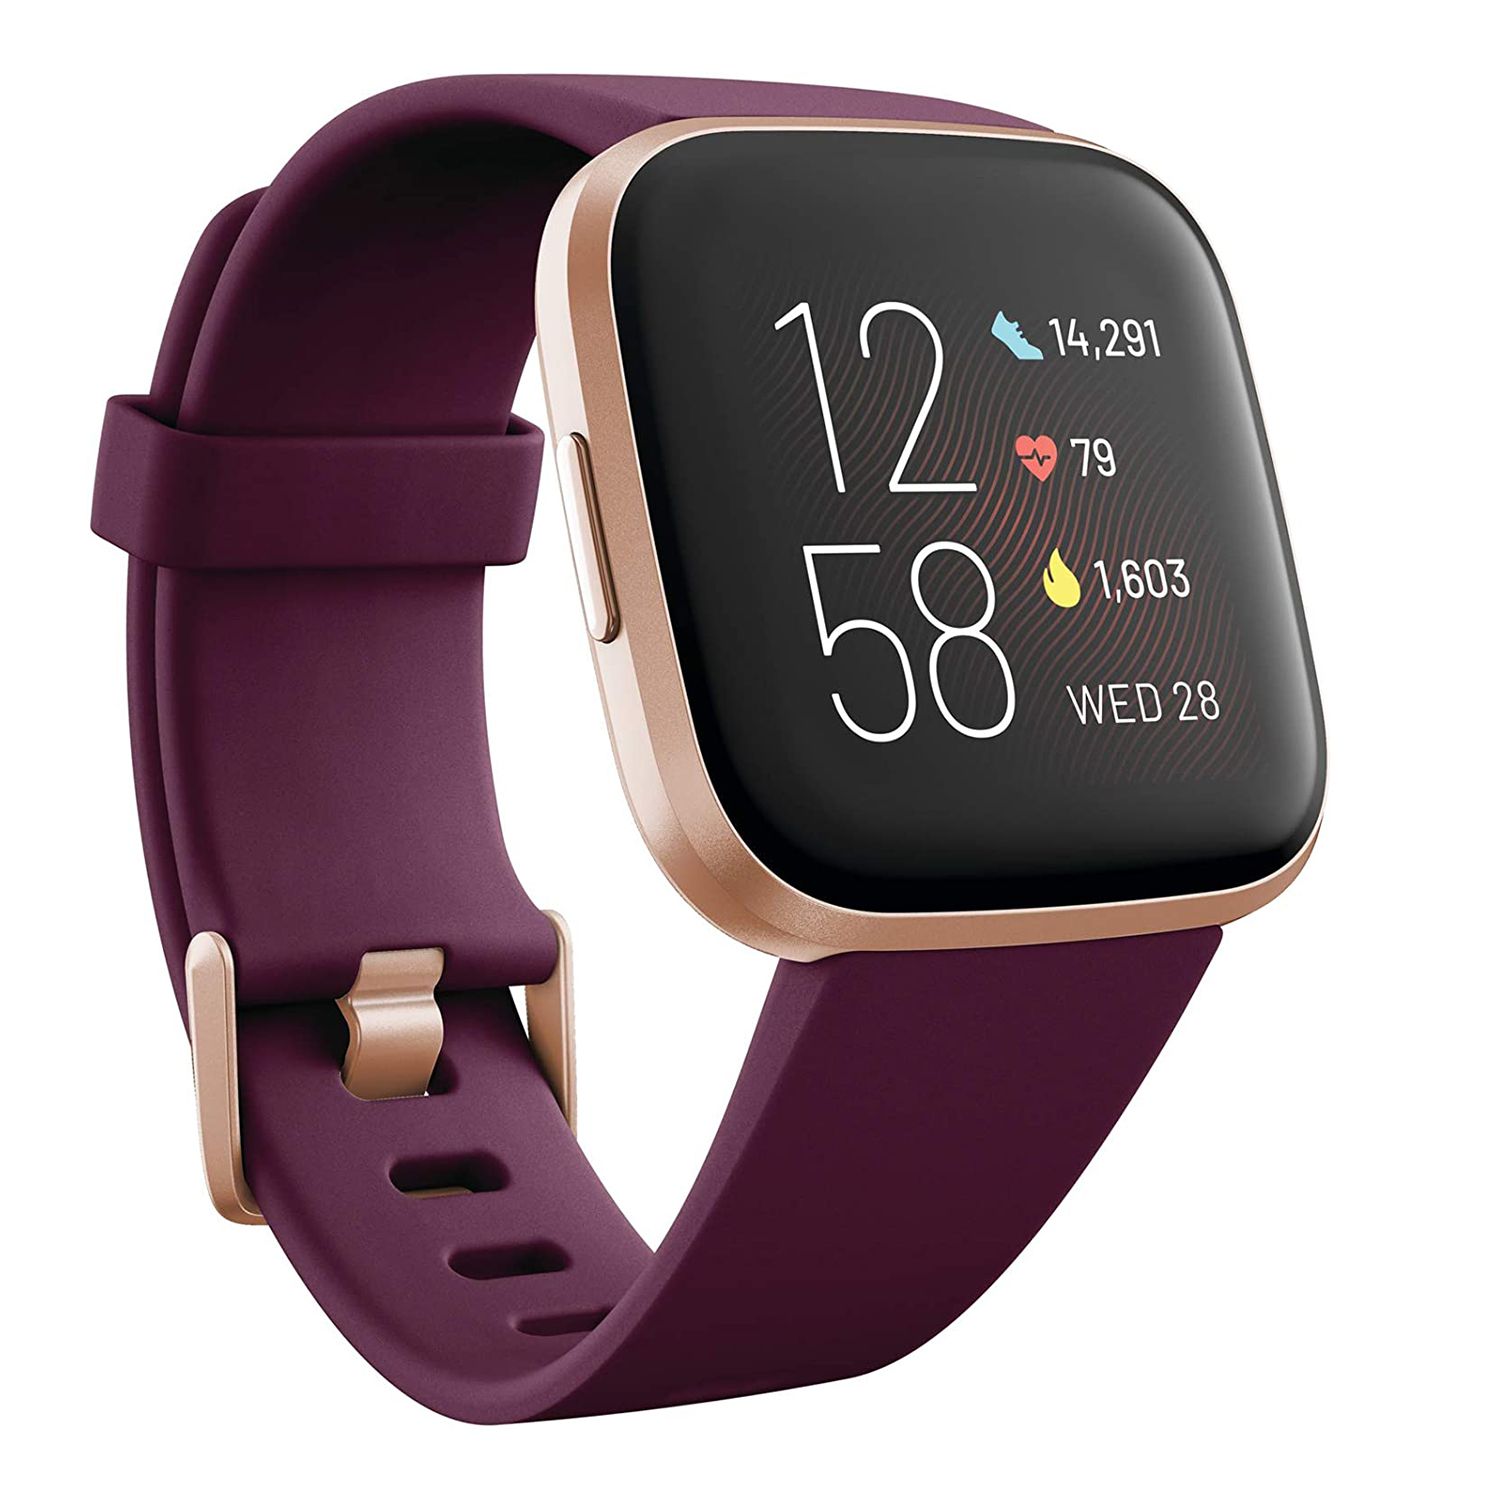 “Fitbit Versa’s Inclusion in Amazon Prime Day: What to Expect” – GetinPulse